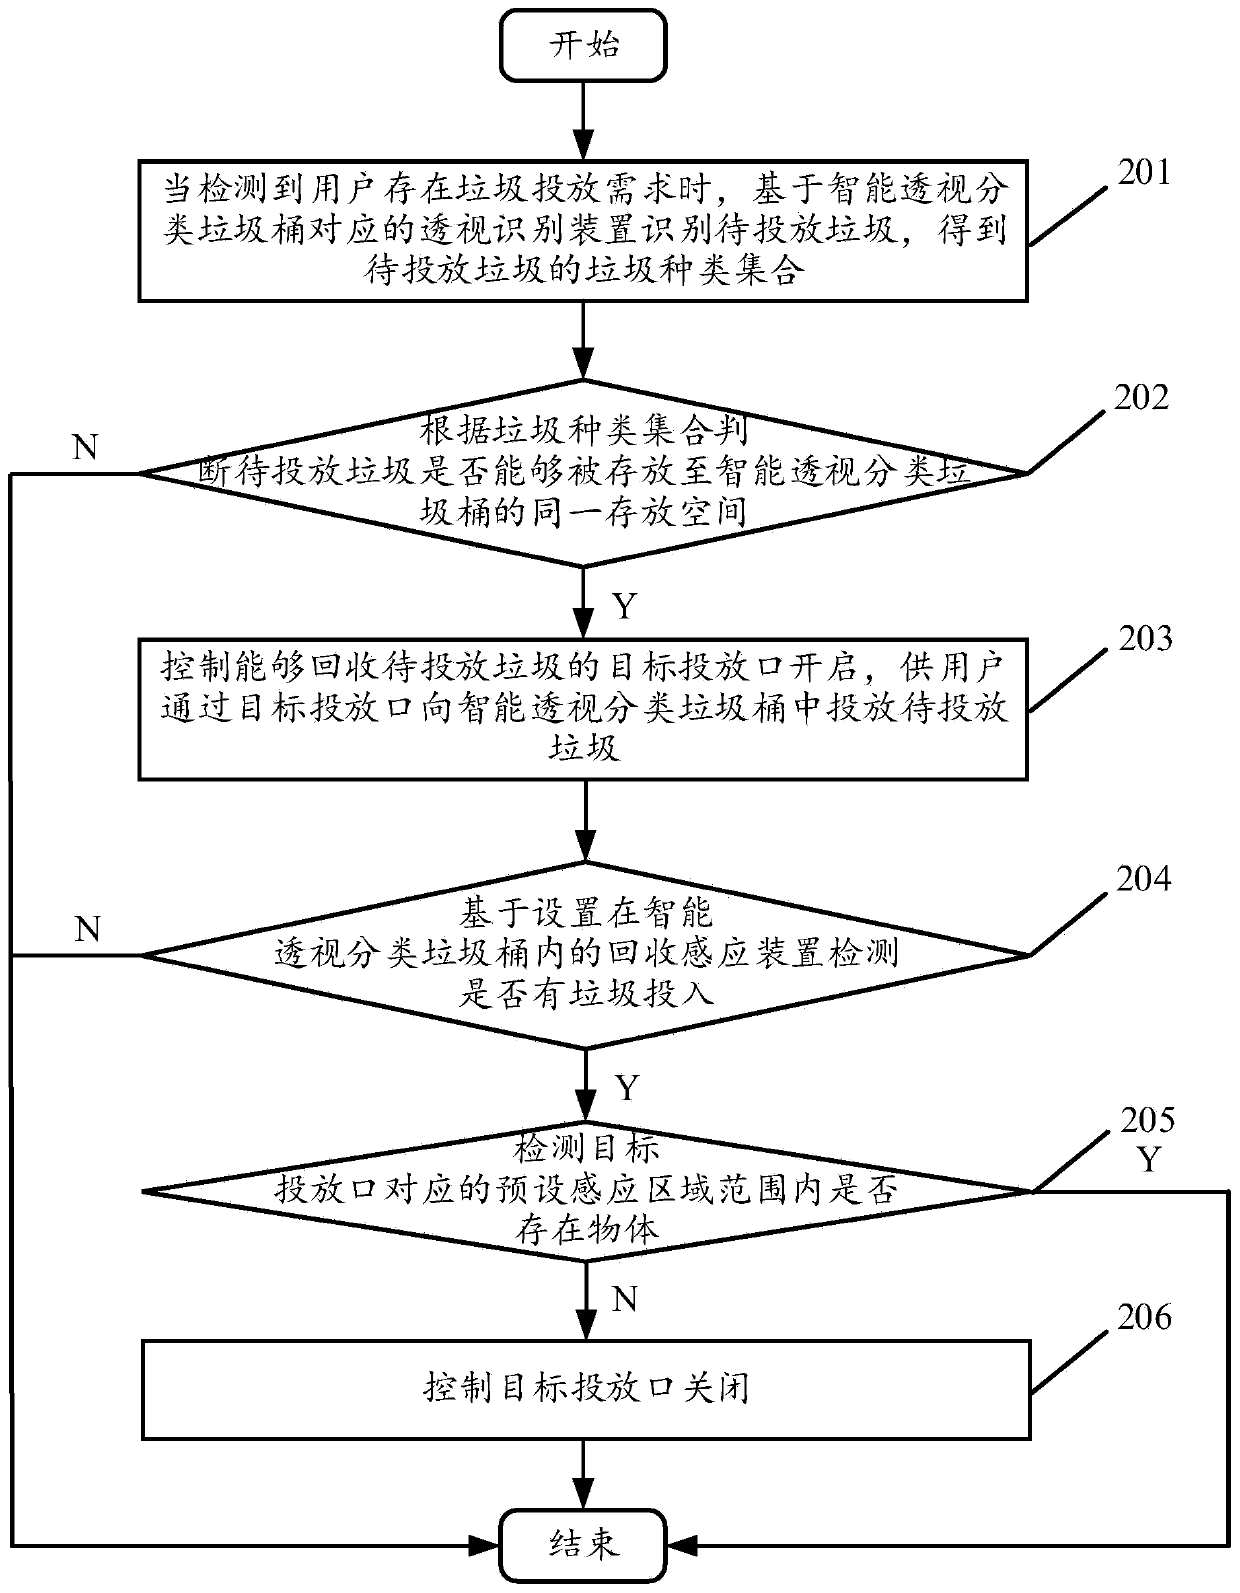 Garbage recycling implementation method and device based on intelligent perspective classification garbage can